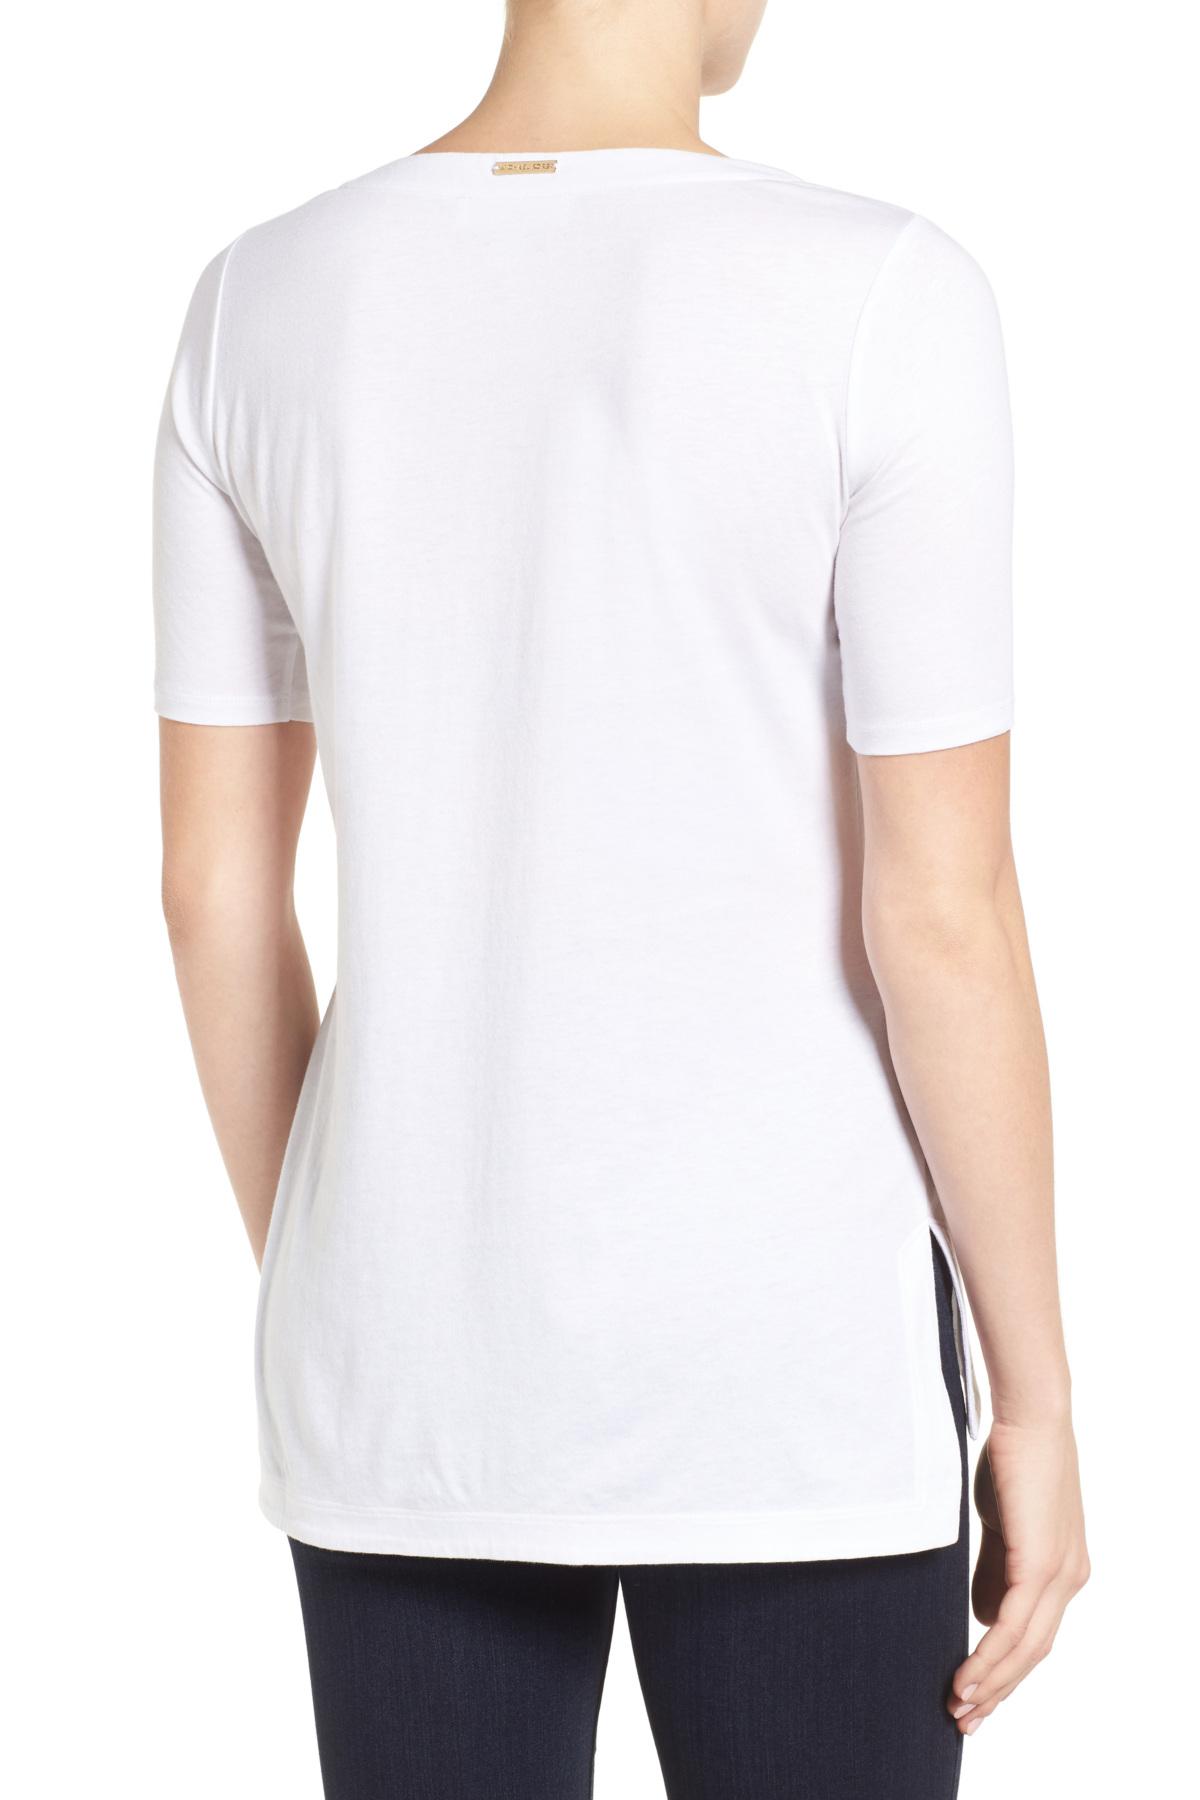 Lyst - Michael Michael Kors Lace-up Tee in White